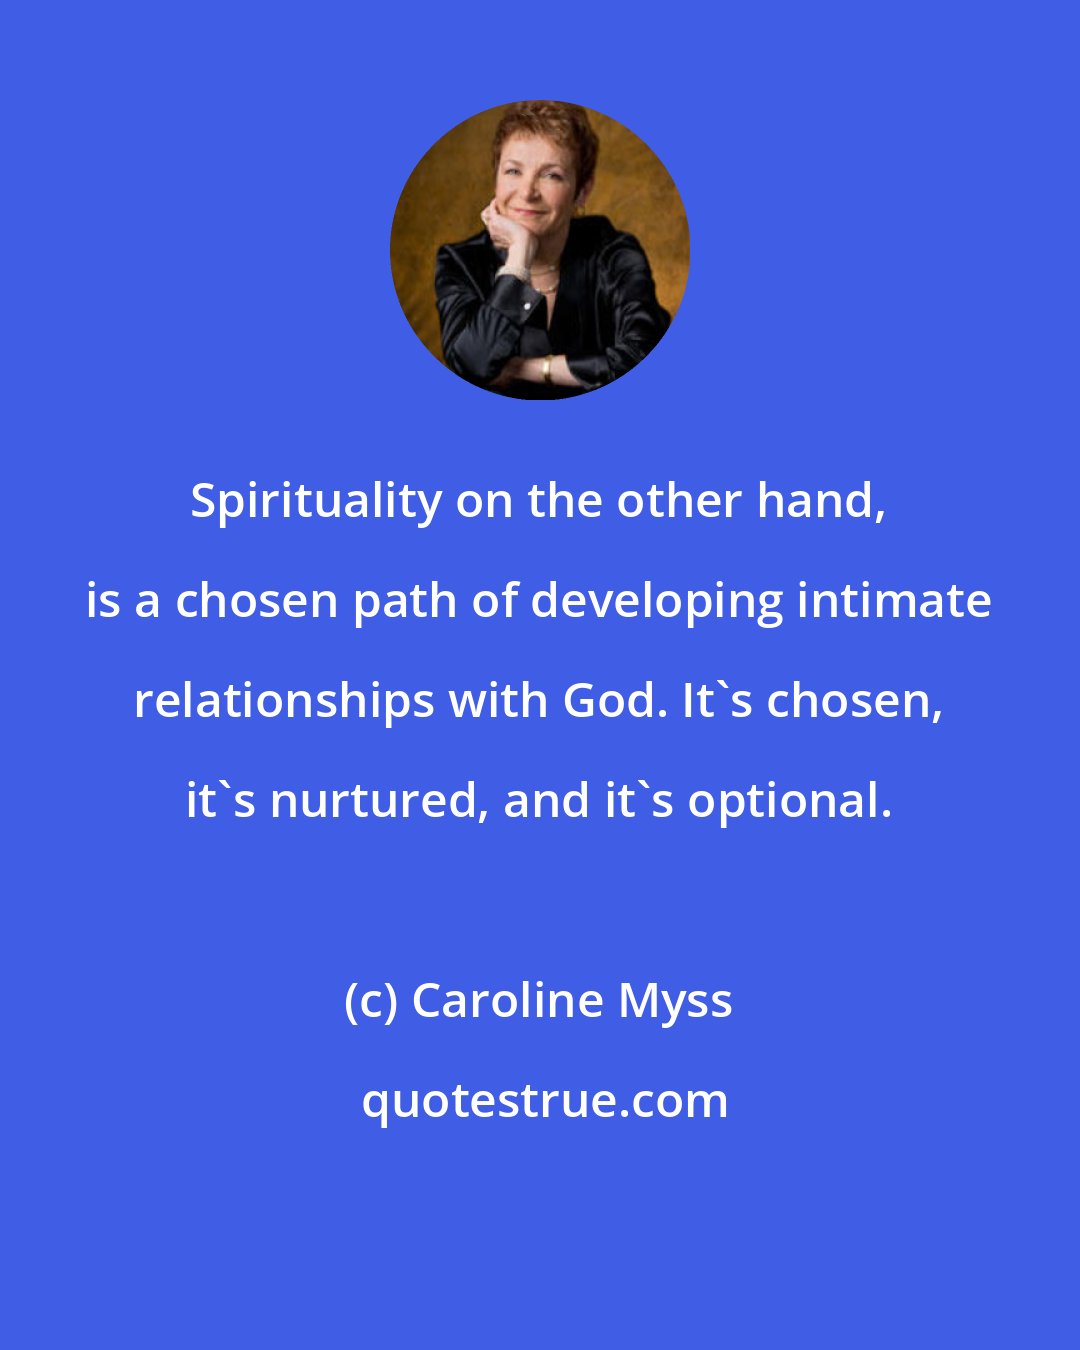 Caroline Myss: Spirituality on the other hand, is a chosen path of developing intimate relationships with God. It's chosen, it's nurtured, and it's optional.